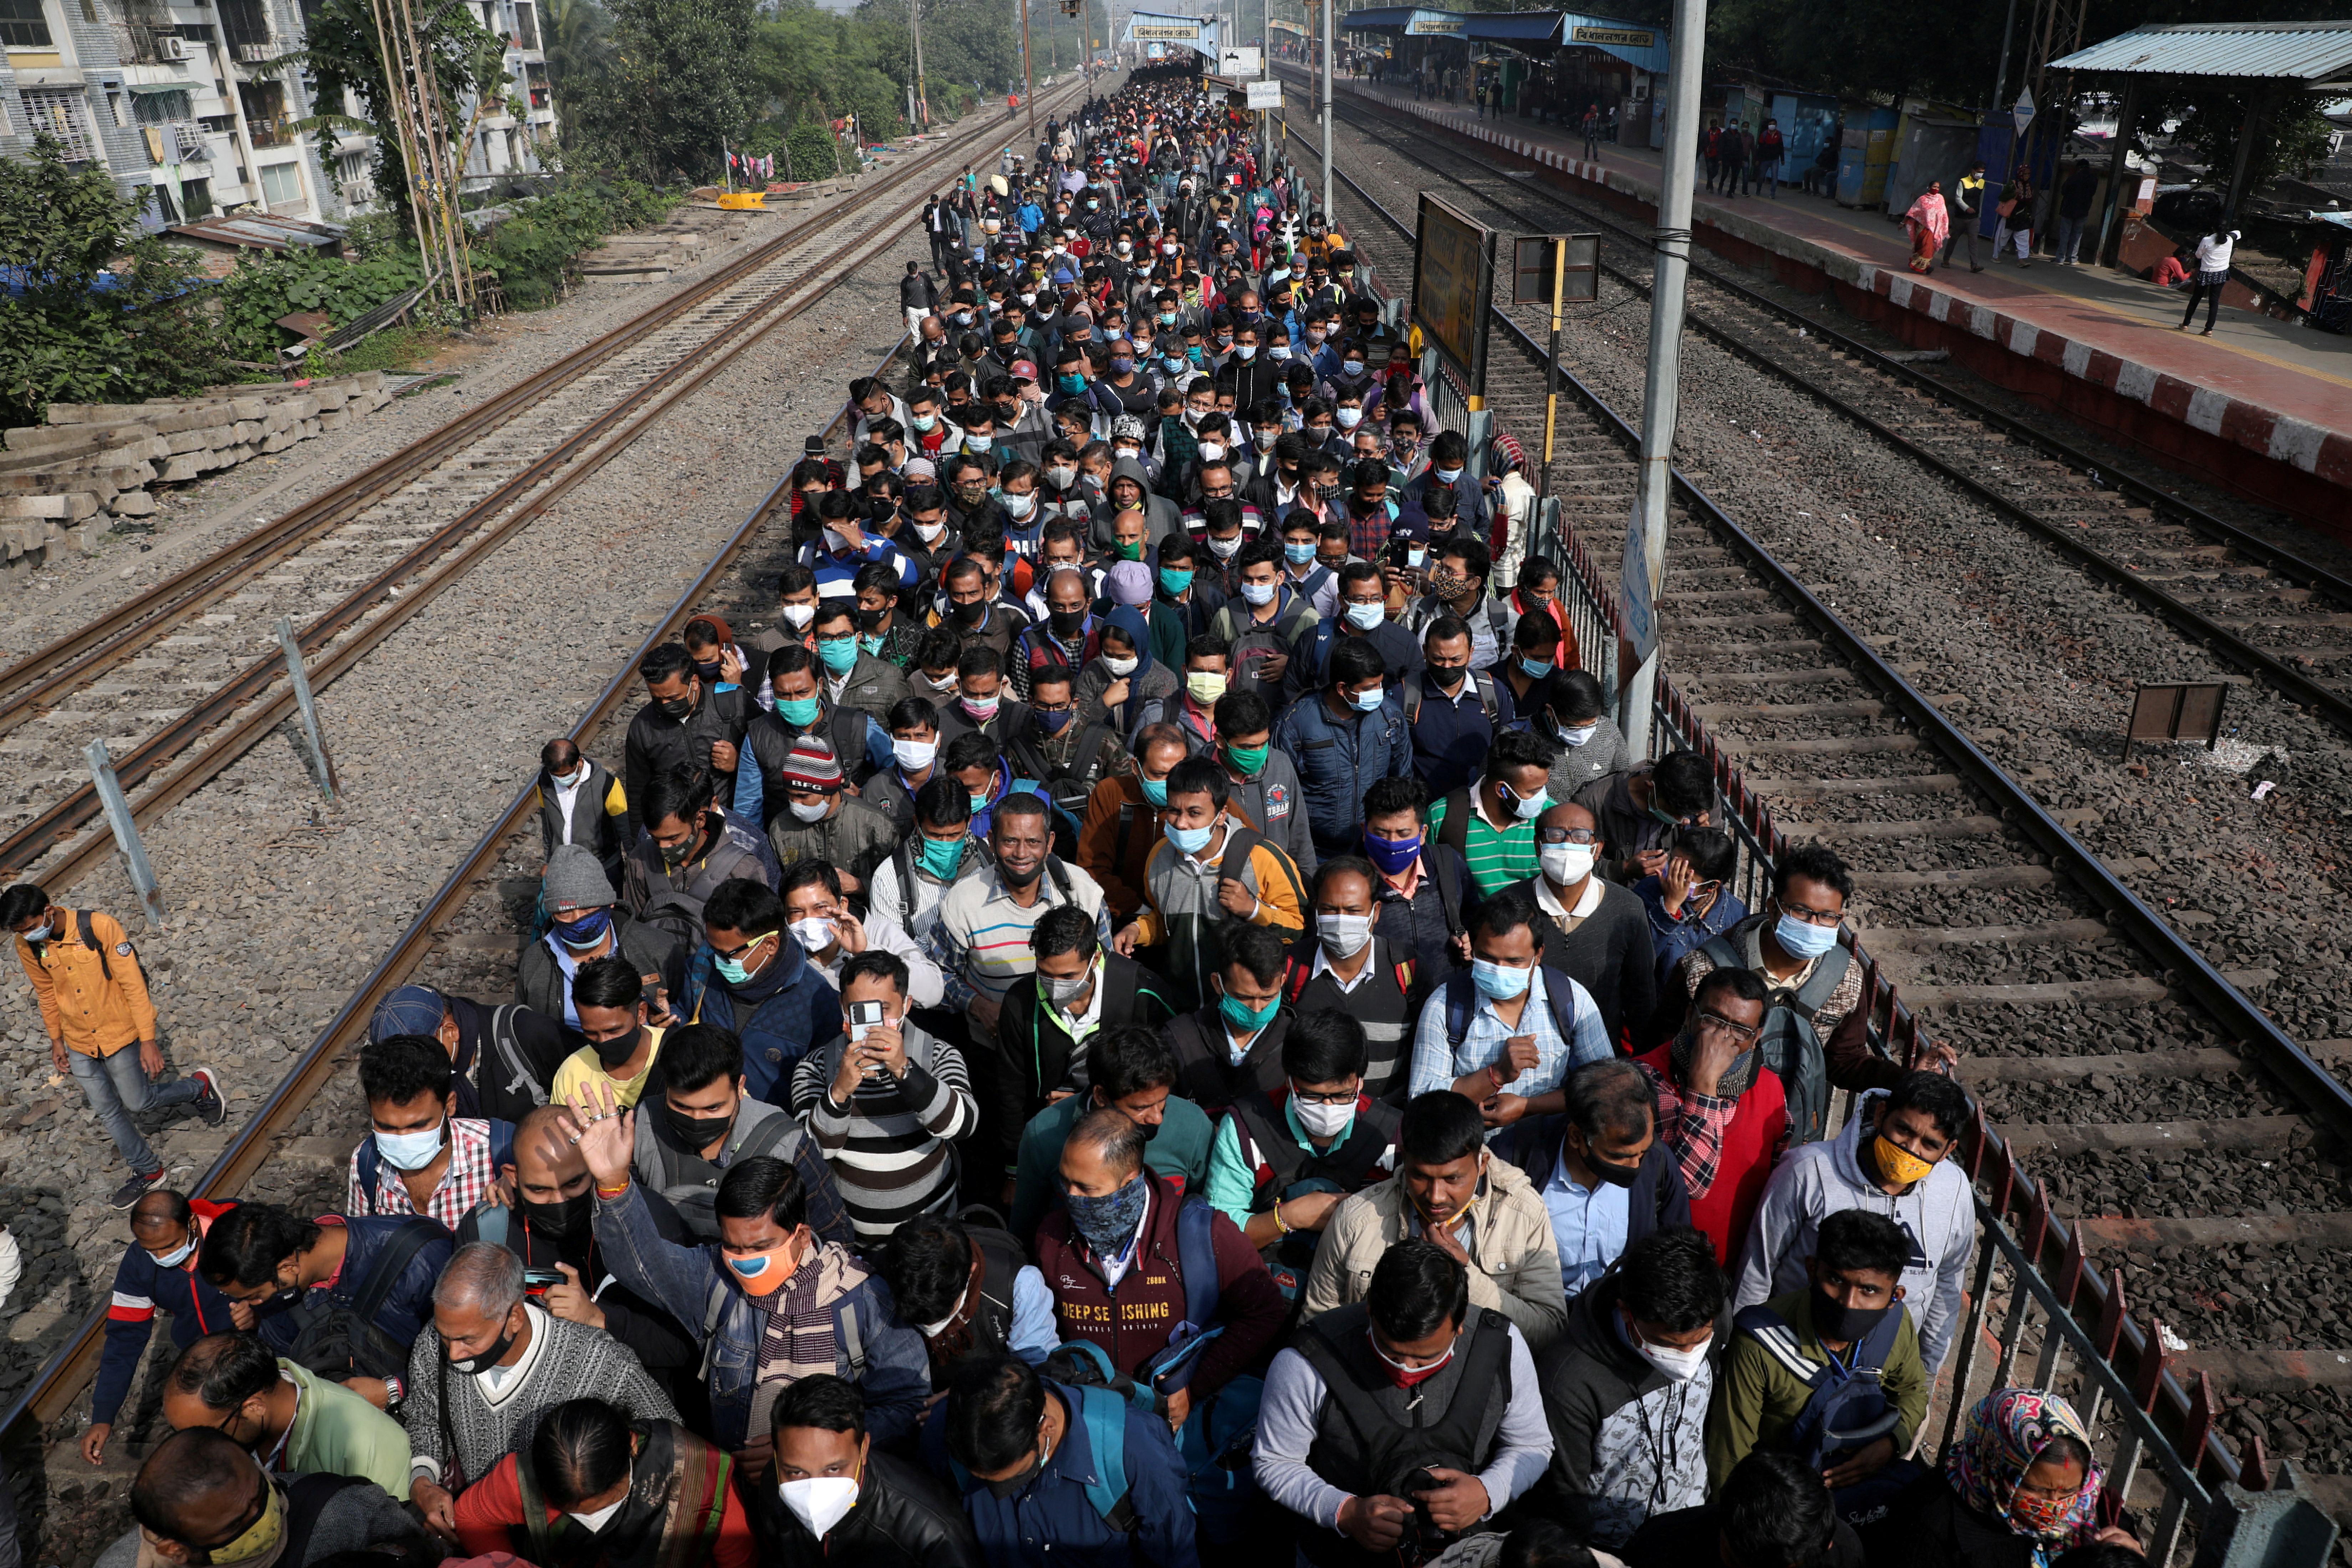 Commuters leave a platform after disembarking from a suburban train on the outskirts of Kolkata